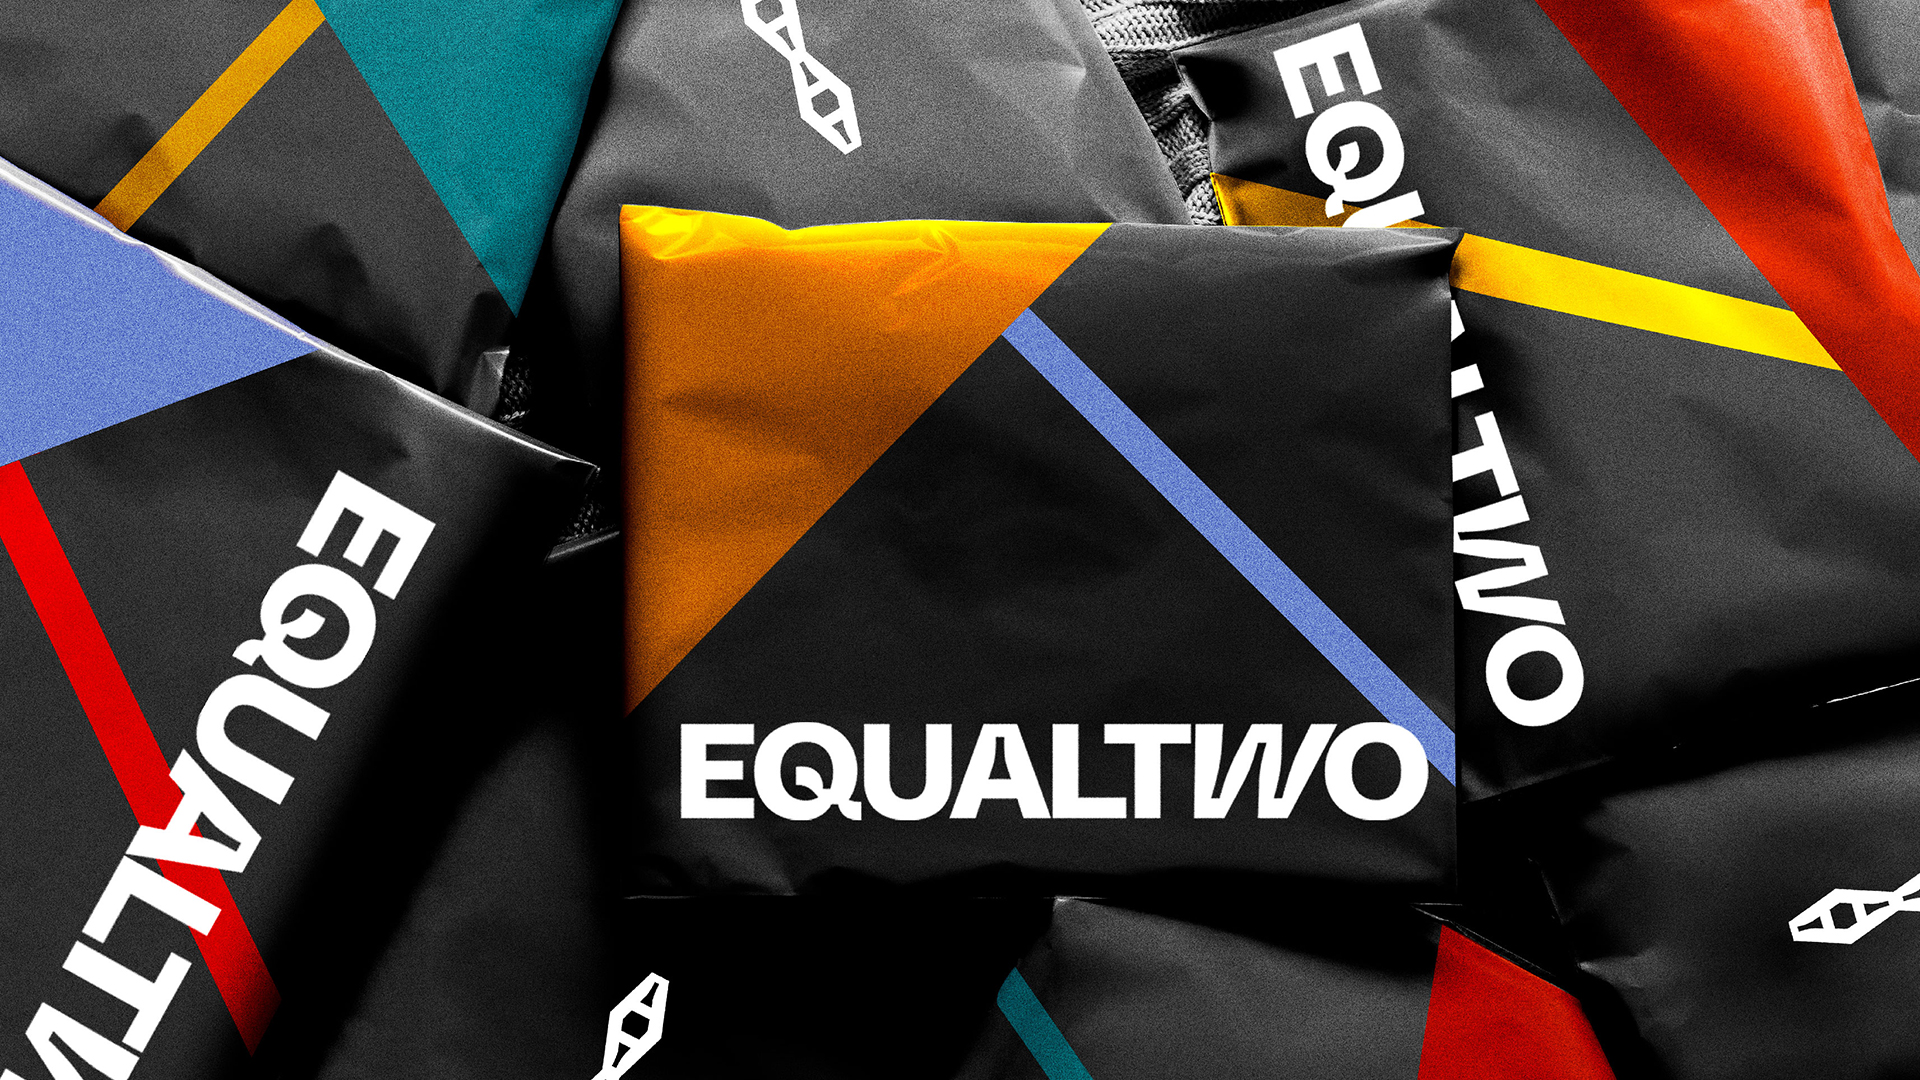 Equaltwo laptop sleeves with logo, black, white, orange, blue, red and yellow